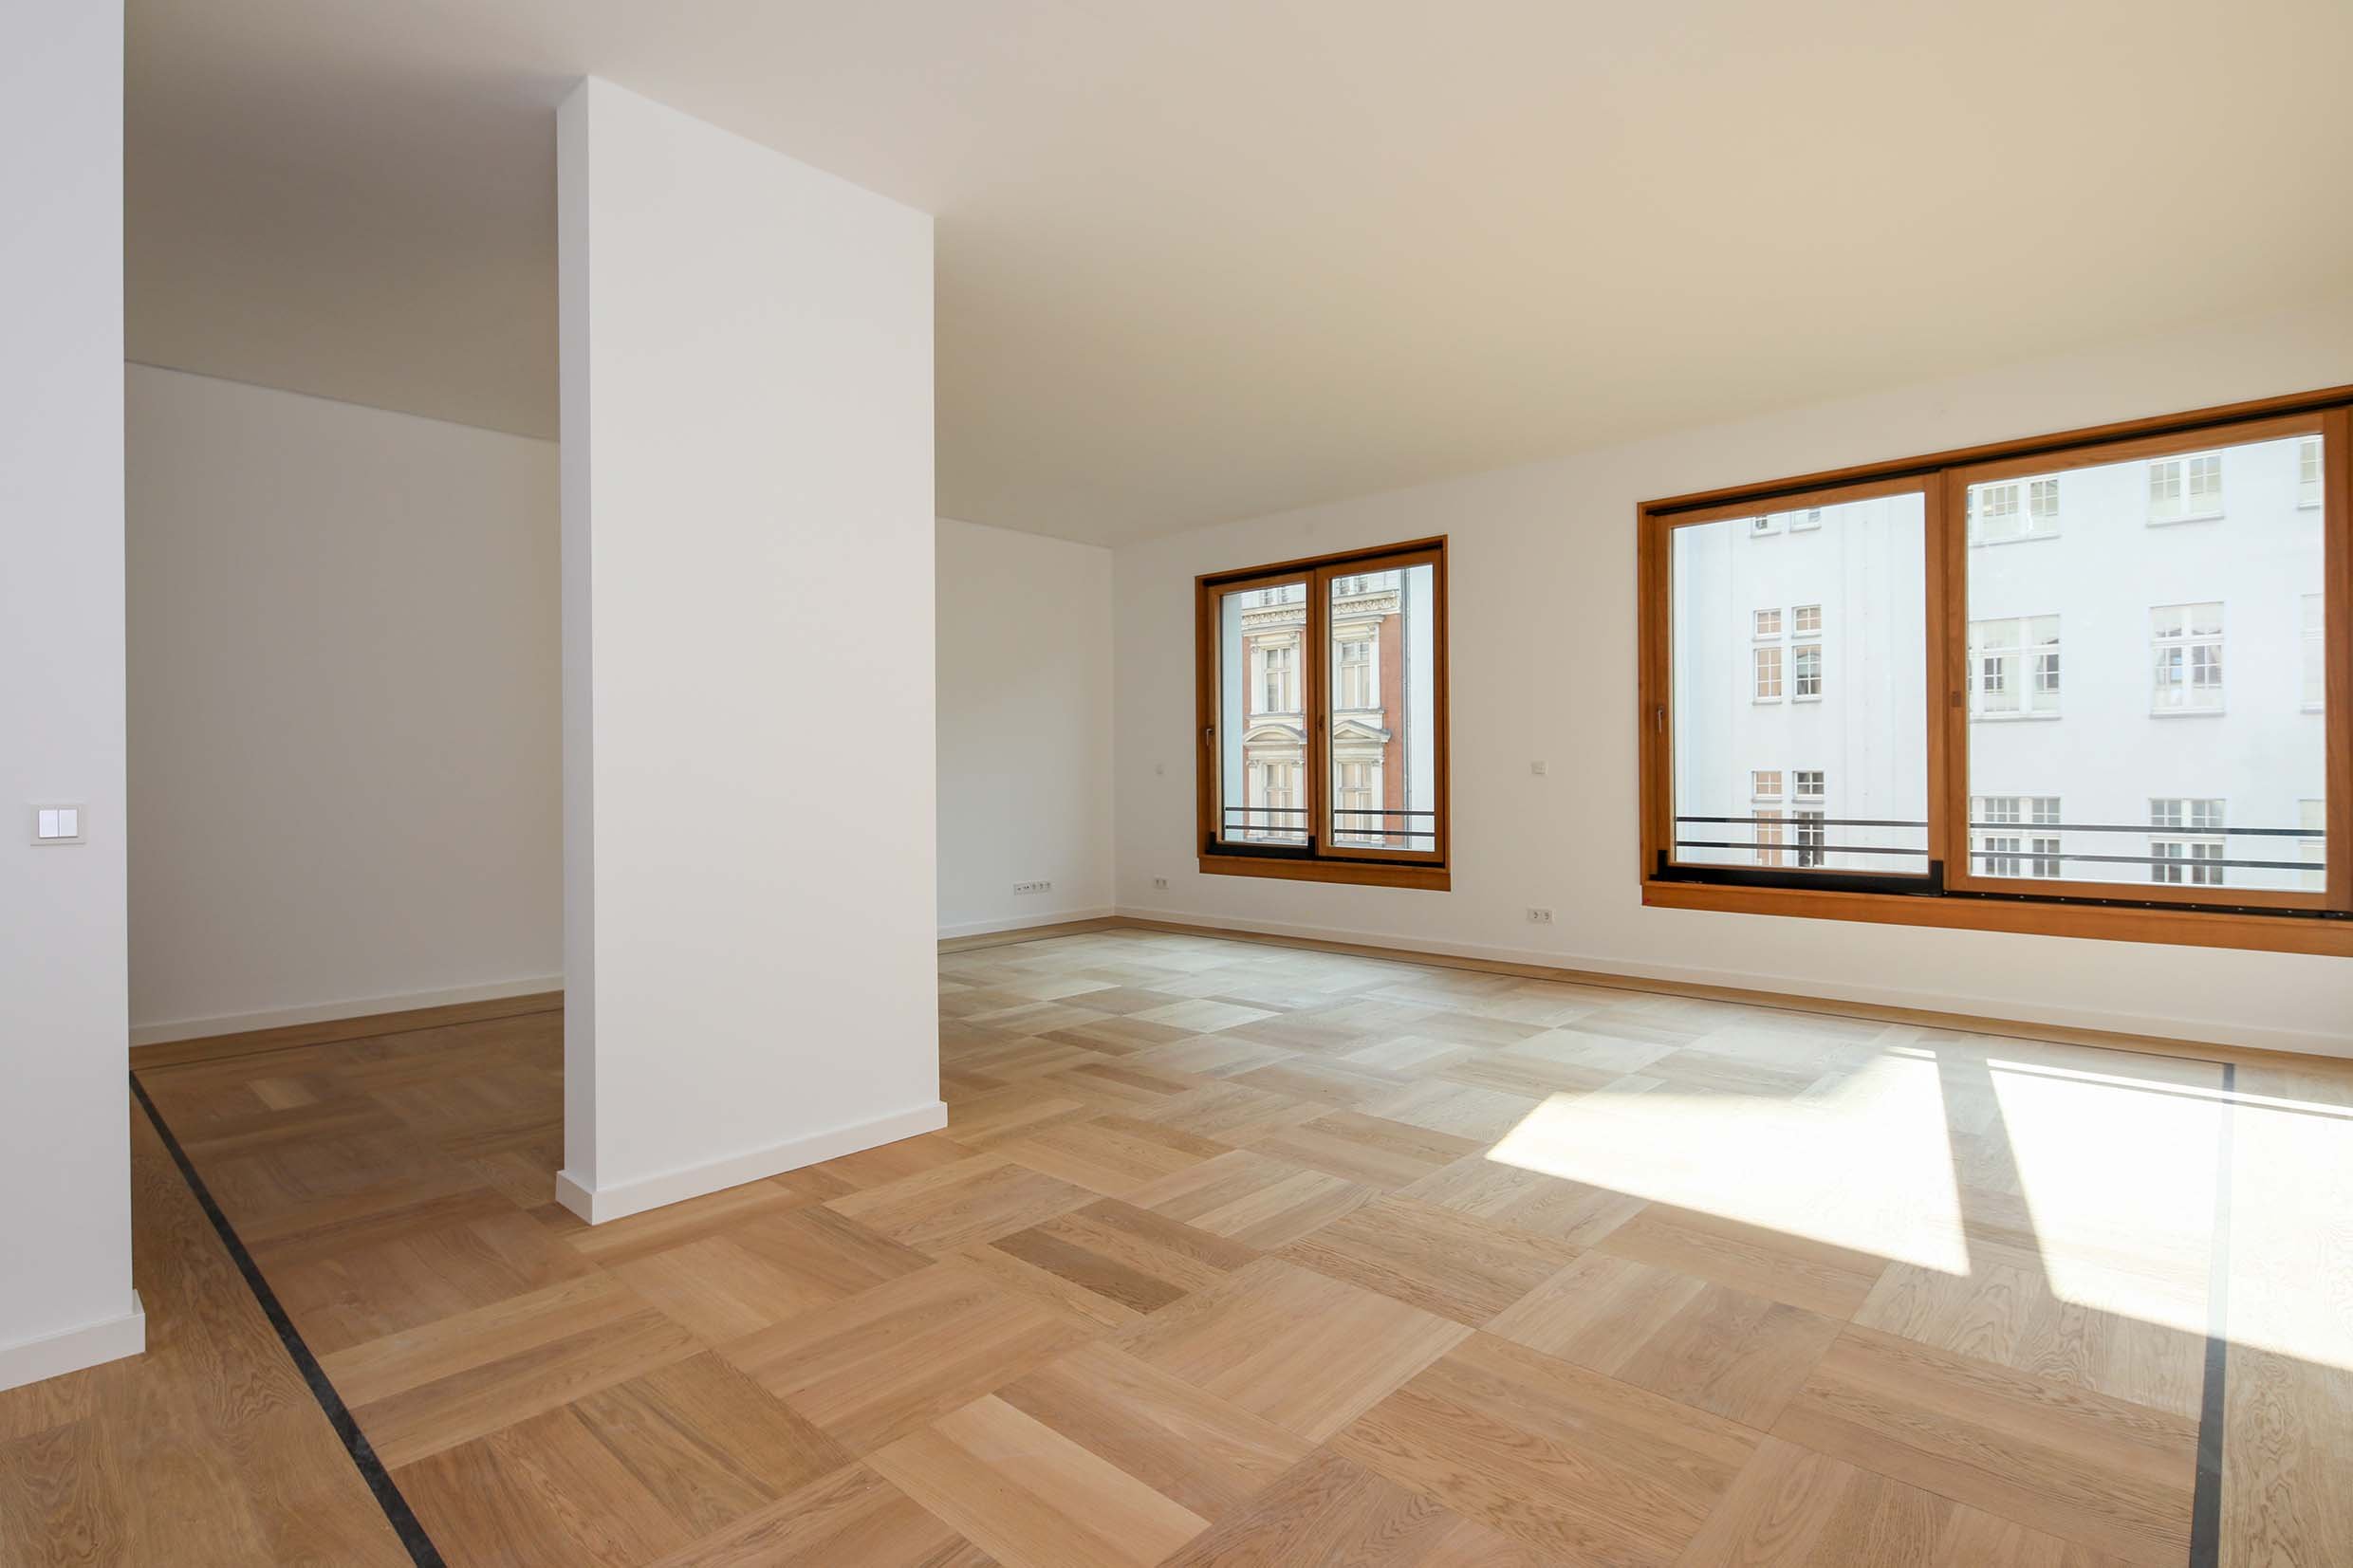 Palais Varnhagen by David Chipperfield successfully sold by Rabitz Property Consulting